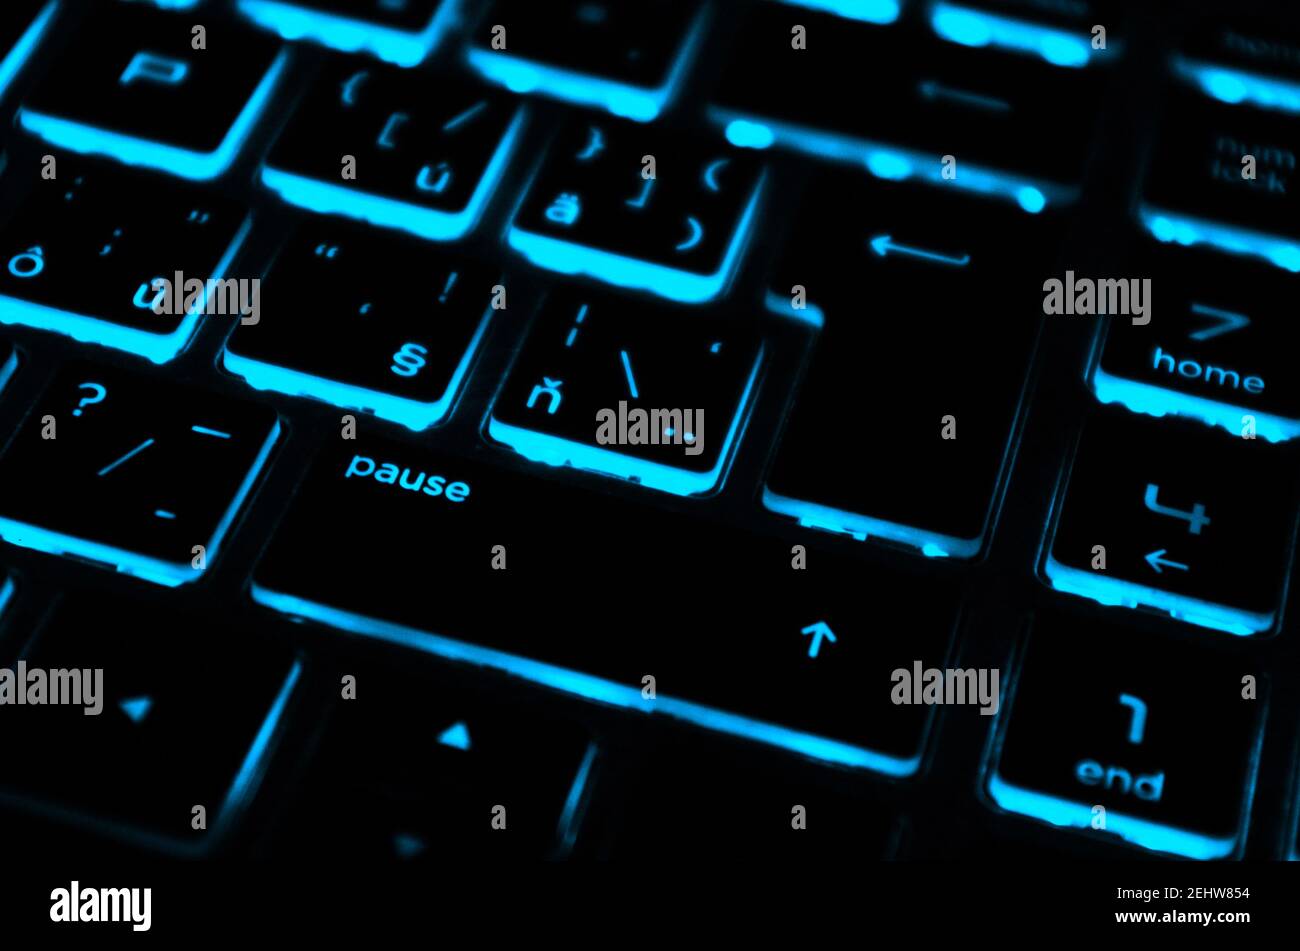 Modern blue iluminated backlit keyboard.Blue backlight, backlit on laptop or keyborad computer of gaming in the dark.Paused game. Cyber Attack concept. Stock Photo